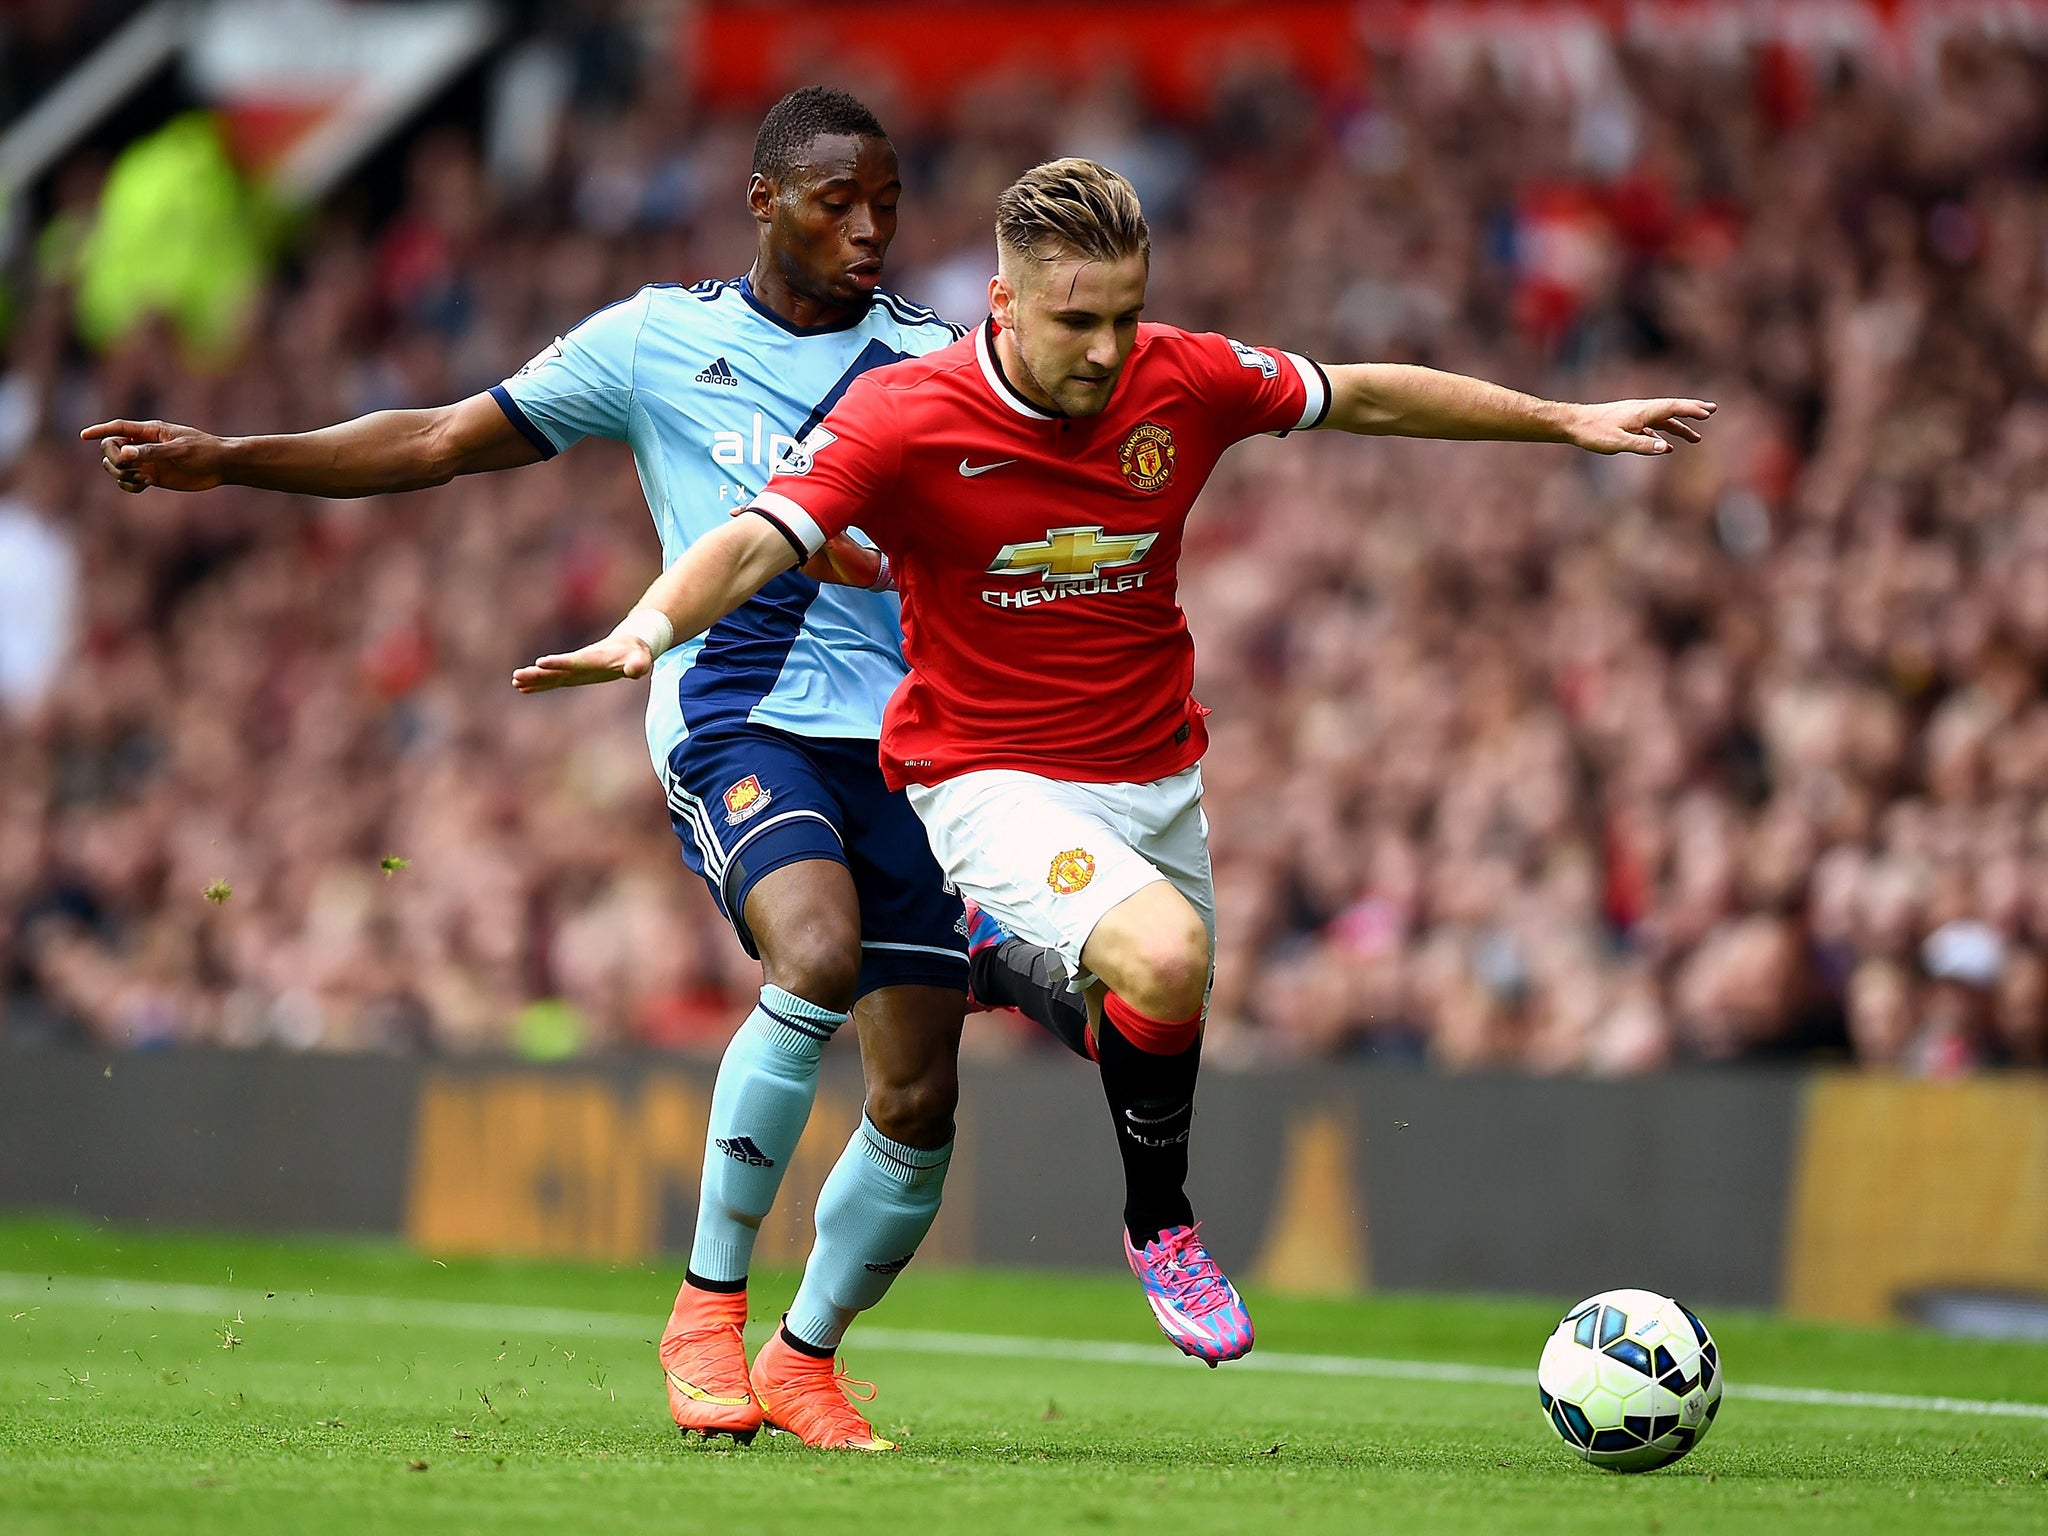 Luke Shaw’s performance in the derby will be key to how his Manchester United side
get on